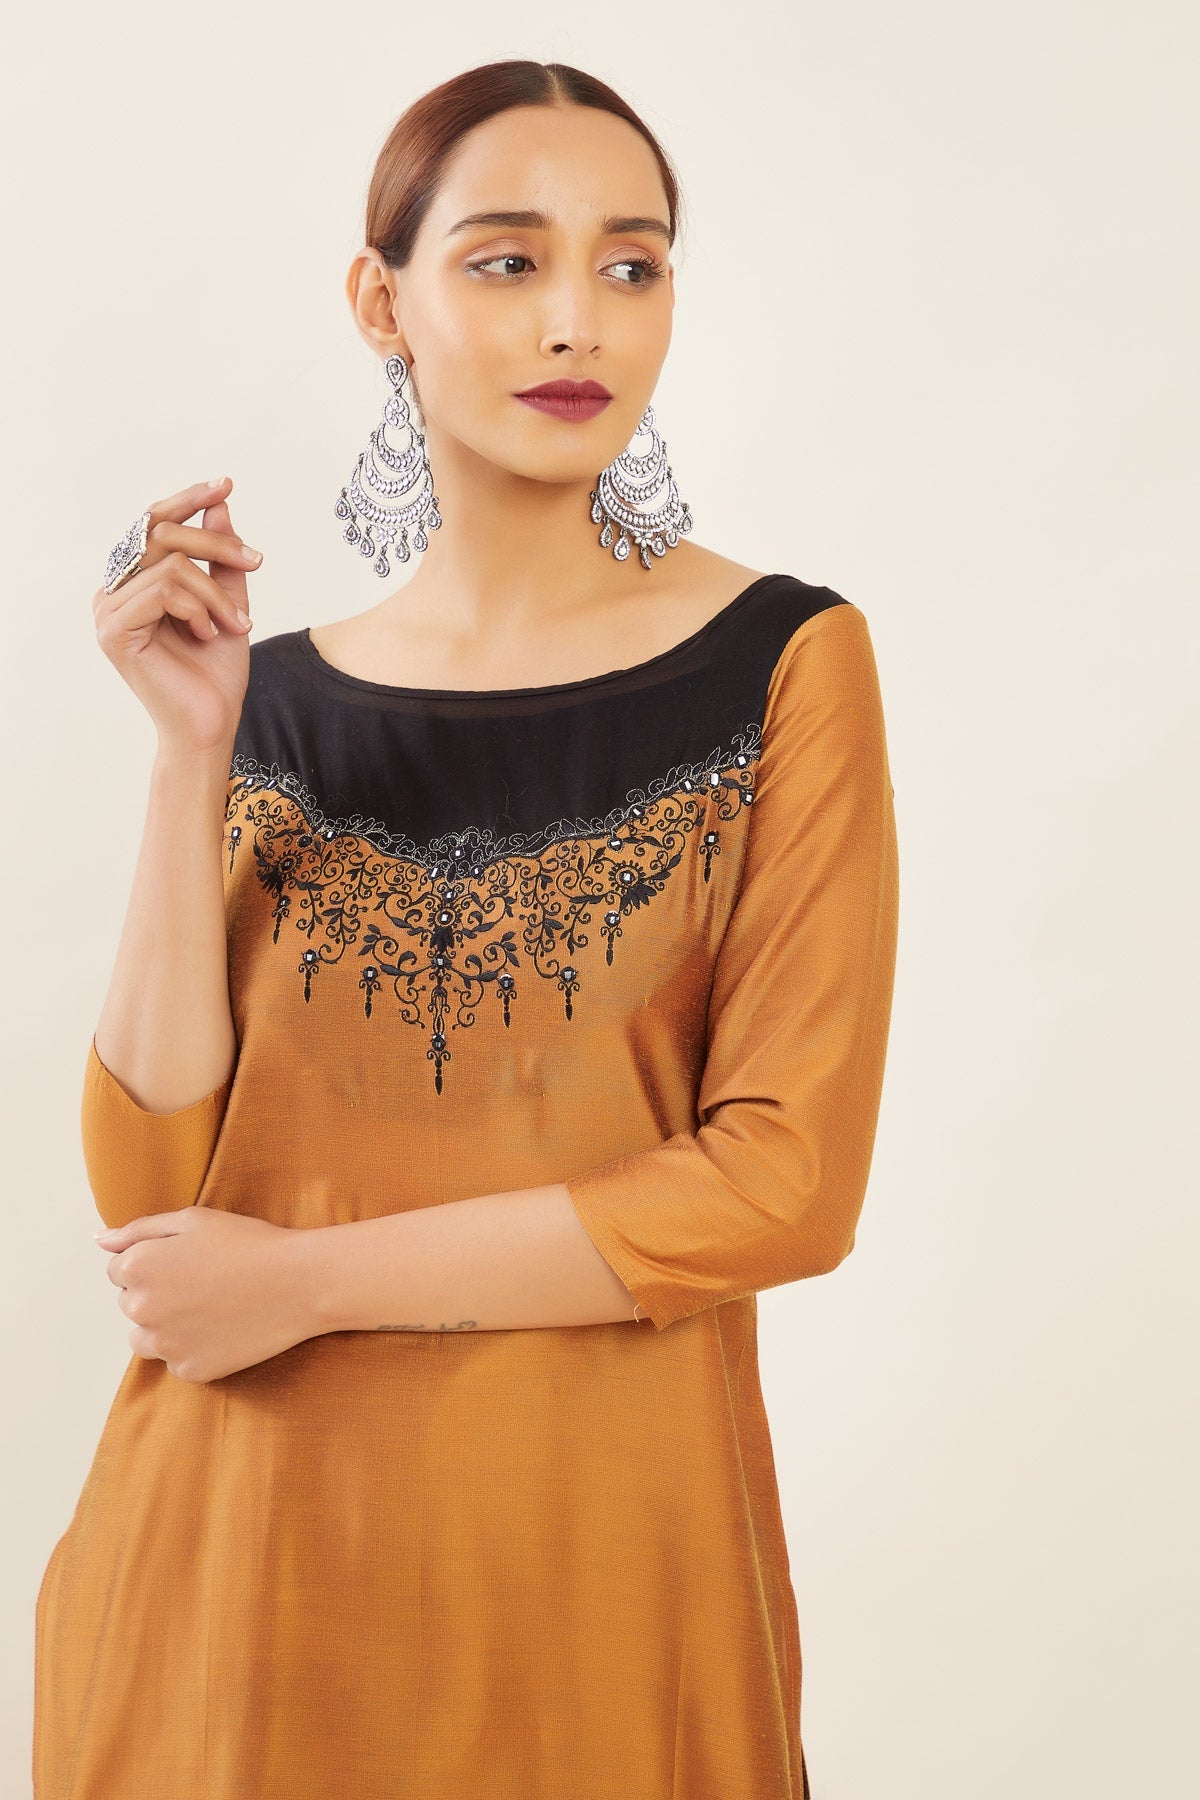 Contrast Double Layered Net with Vintage Floral Embroidered Sleeveless Kurta - Rust Orange